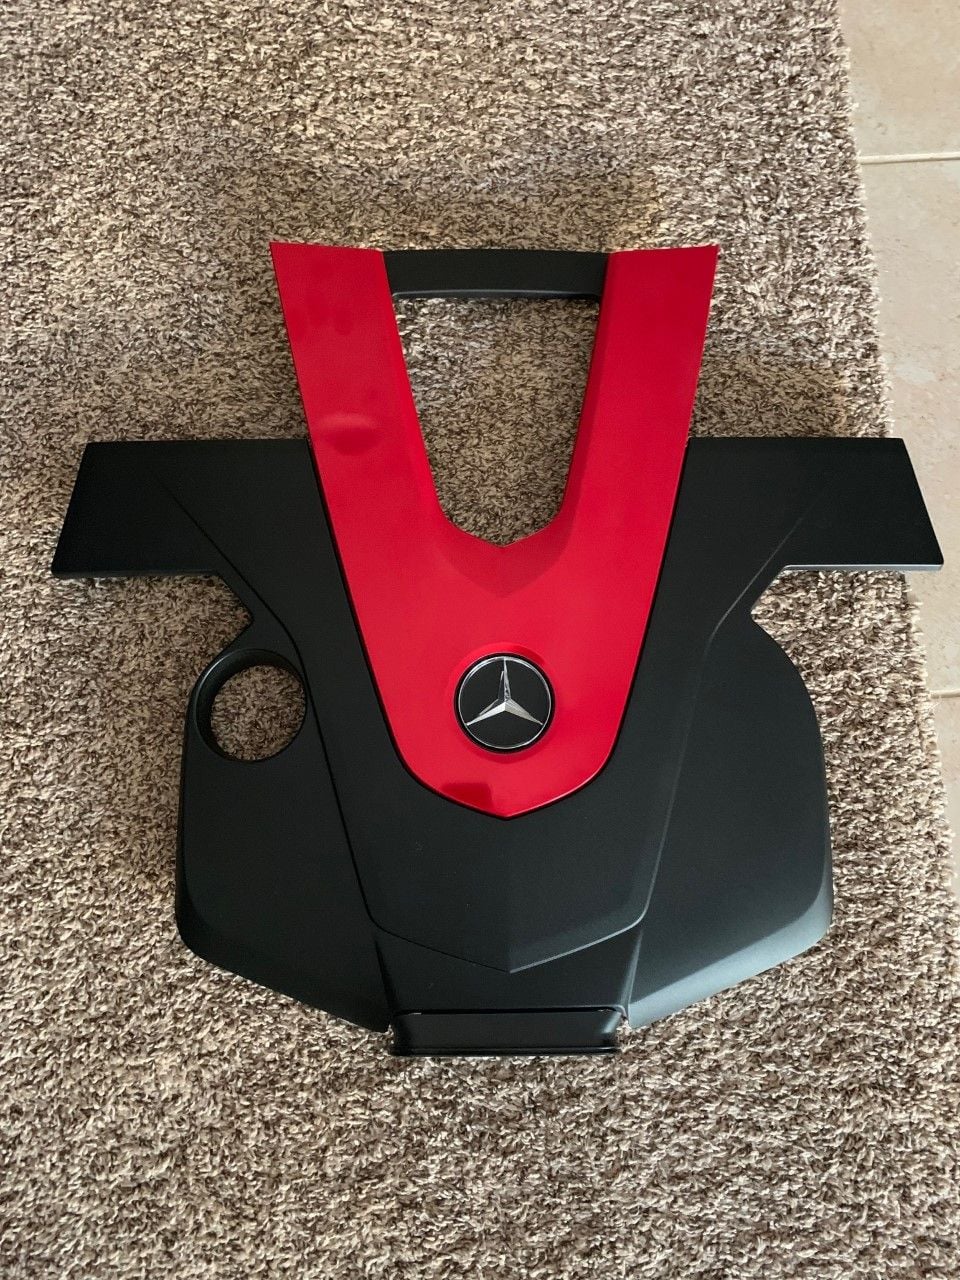 Exterior Body Parts - Engine cover - Used - 2015 Mercedes-Benz C400 - 2017 to 2019 Mercedes-Benz C43 AMG - 2016 Mercedes-Benz C450 AMG - 2016 to 2019 Mercedes-Benz GLC43 AMG - 2017 to 2018 Mercedes-Benz E43 AMG - 2018 to 2019 Mercedes-Benz SLC43 AMG - 2015 to 2017 Mercedes-Benz E400 - Elk Grove, CA 95757, United States